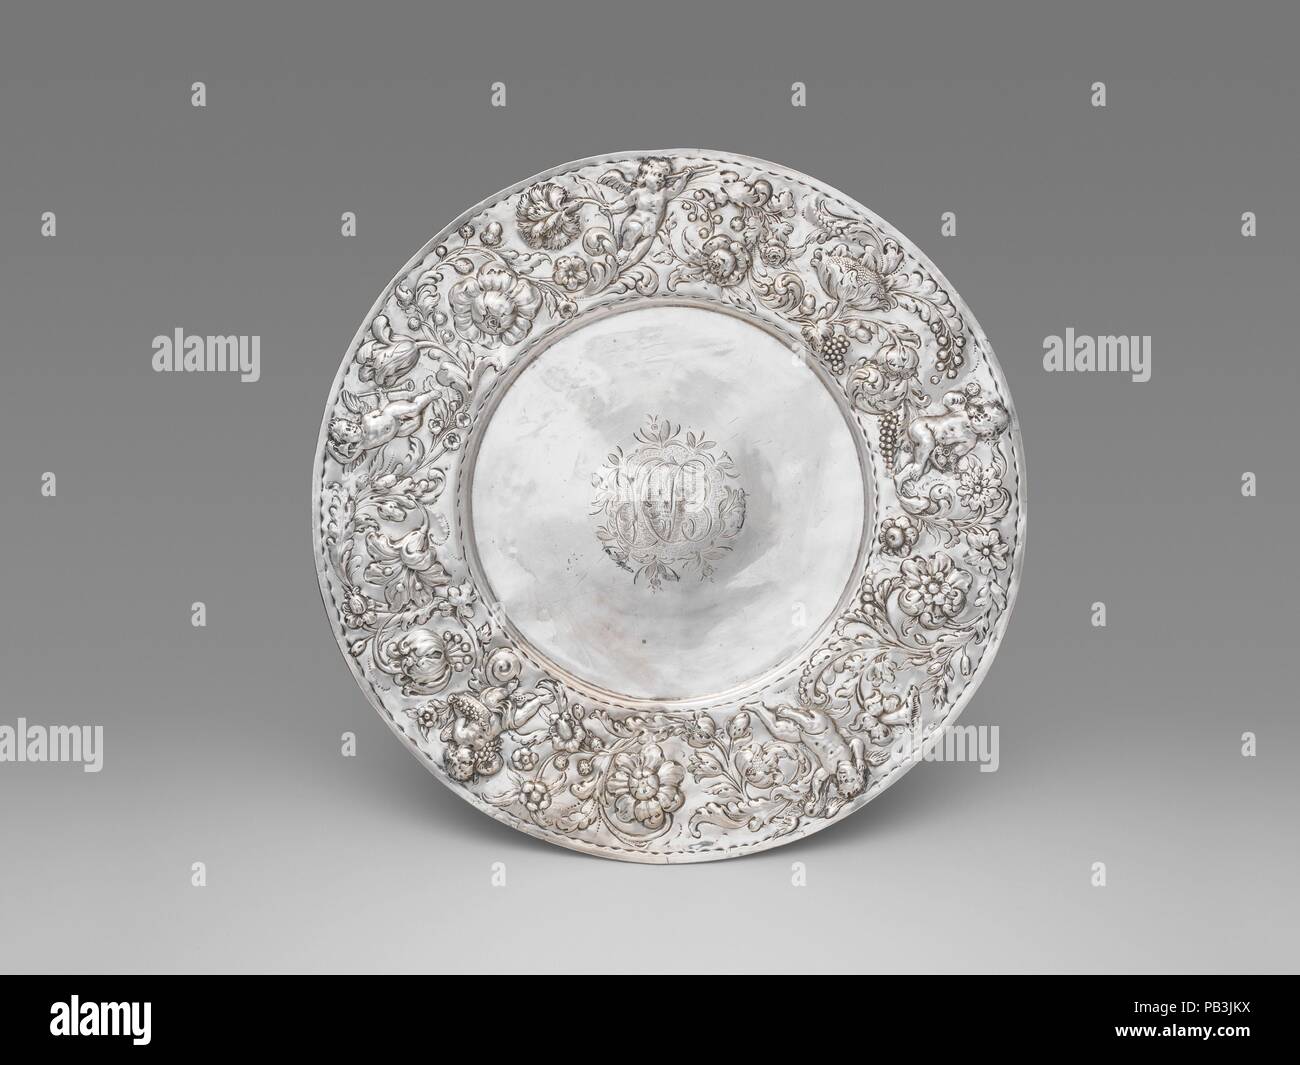 Dish. Culture: Dutch, Amsterdam. Dimensions: Diameter: 14 1/2 in. (36.8 cm). Maker: Sigismund Zschammer (ca. 1630, master 1661, d. before 1698). Date: 1685, with later monogram.  The cherubs, foliage and, particularly, flowers chased in high relief on the border of this dish were popular motifs not only in silver but also in contemporary painting and used for marquetry and gilt leather as can be seen in this and nearby galleries. The monogram engraved in the center refers to a member of De Peyster family, an important Dutch merchant family in New York which included Abraham de Peyster who serv Stock Photo